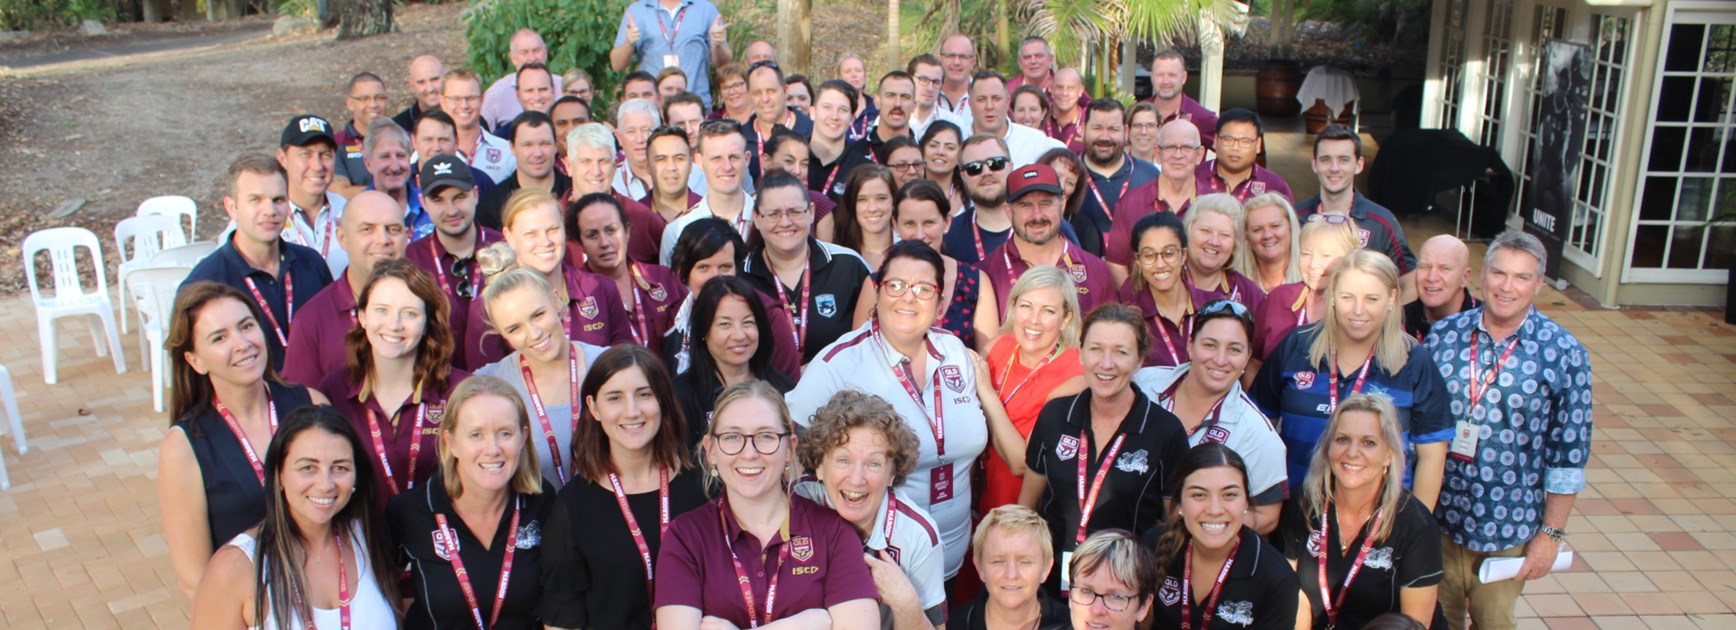 Driving force behind QRL's focus on positive change